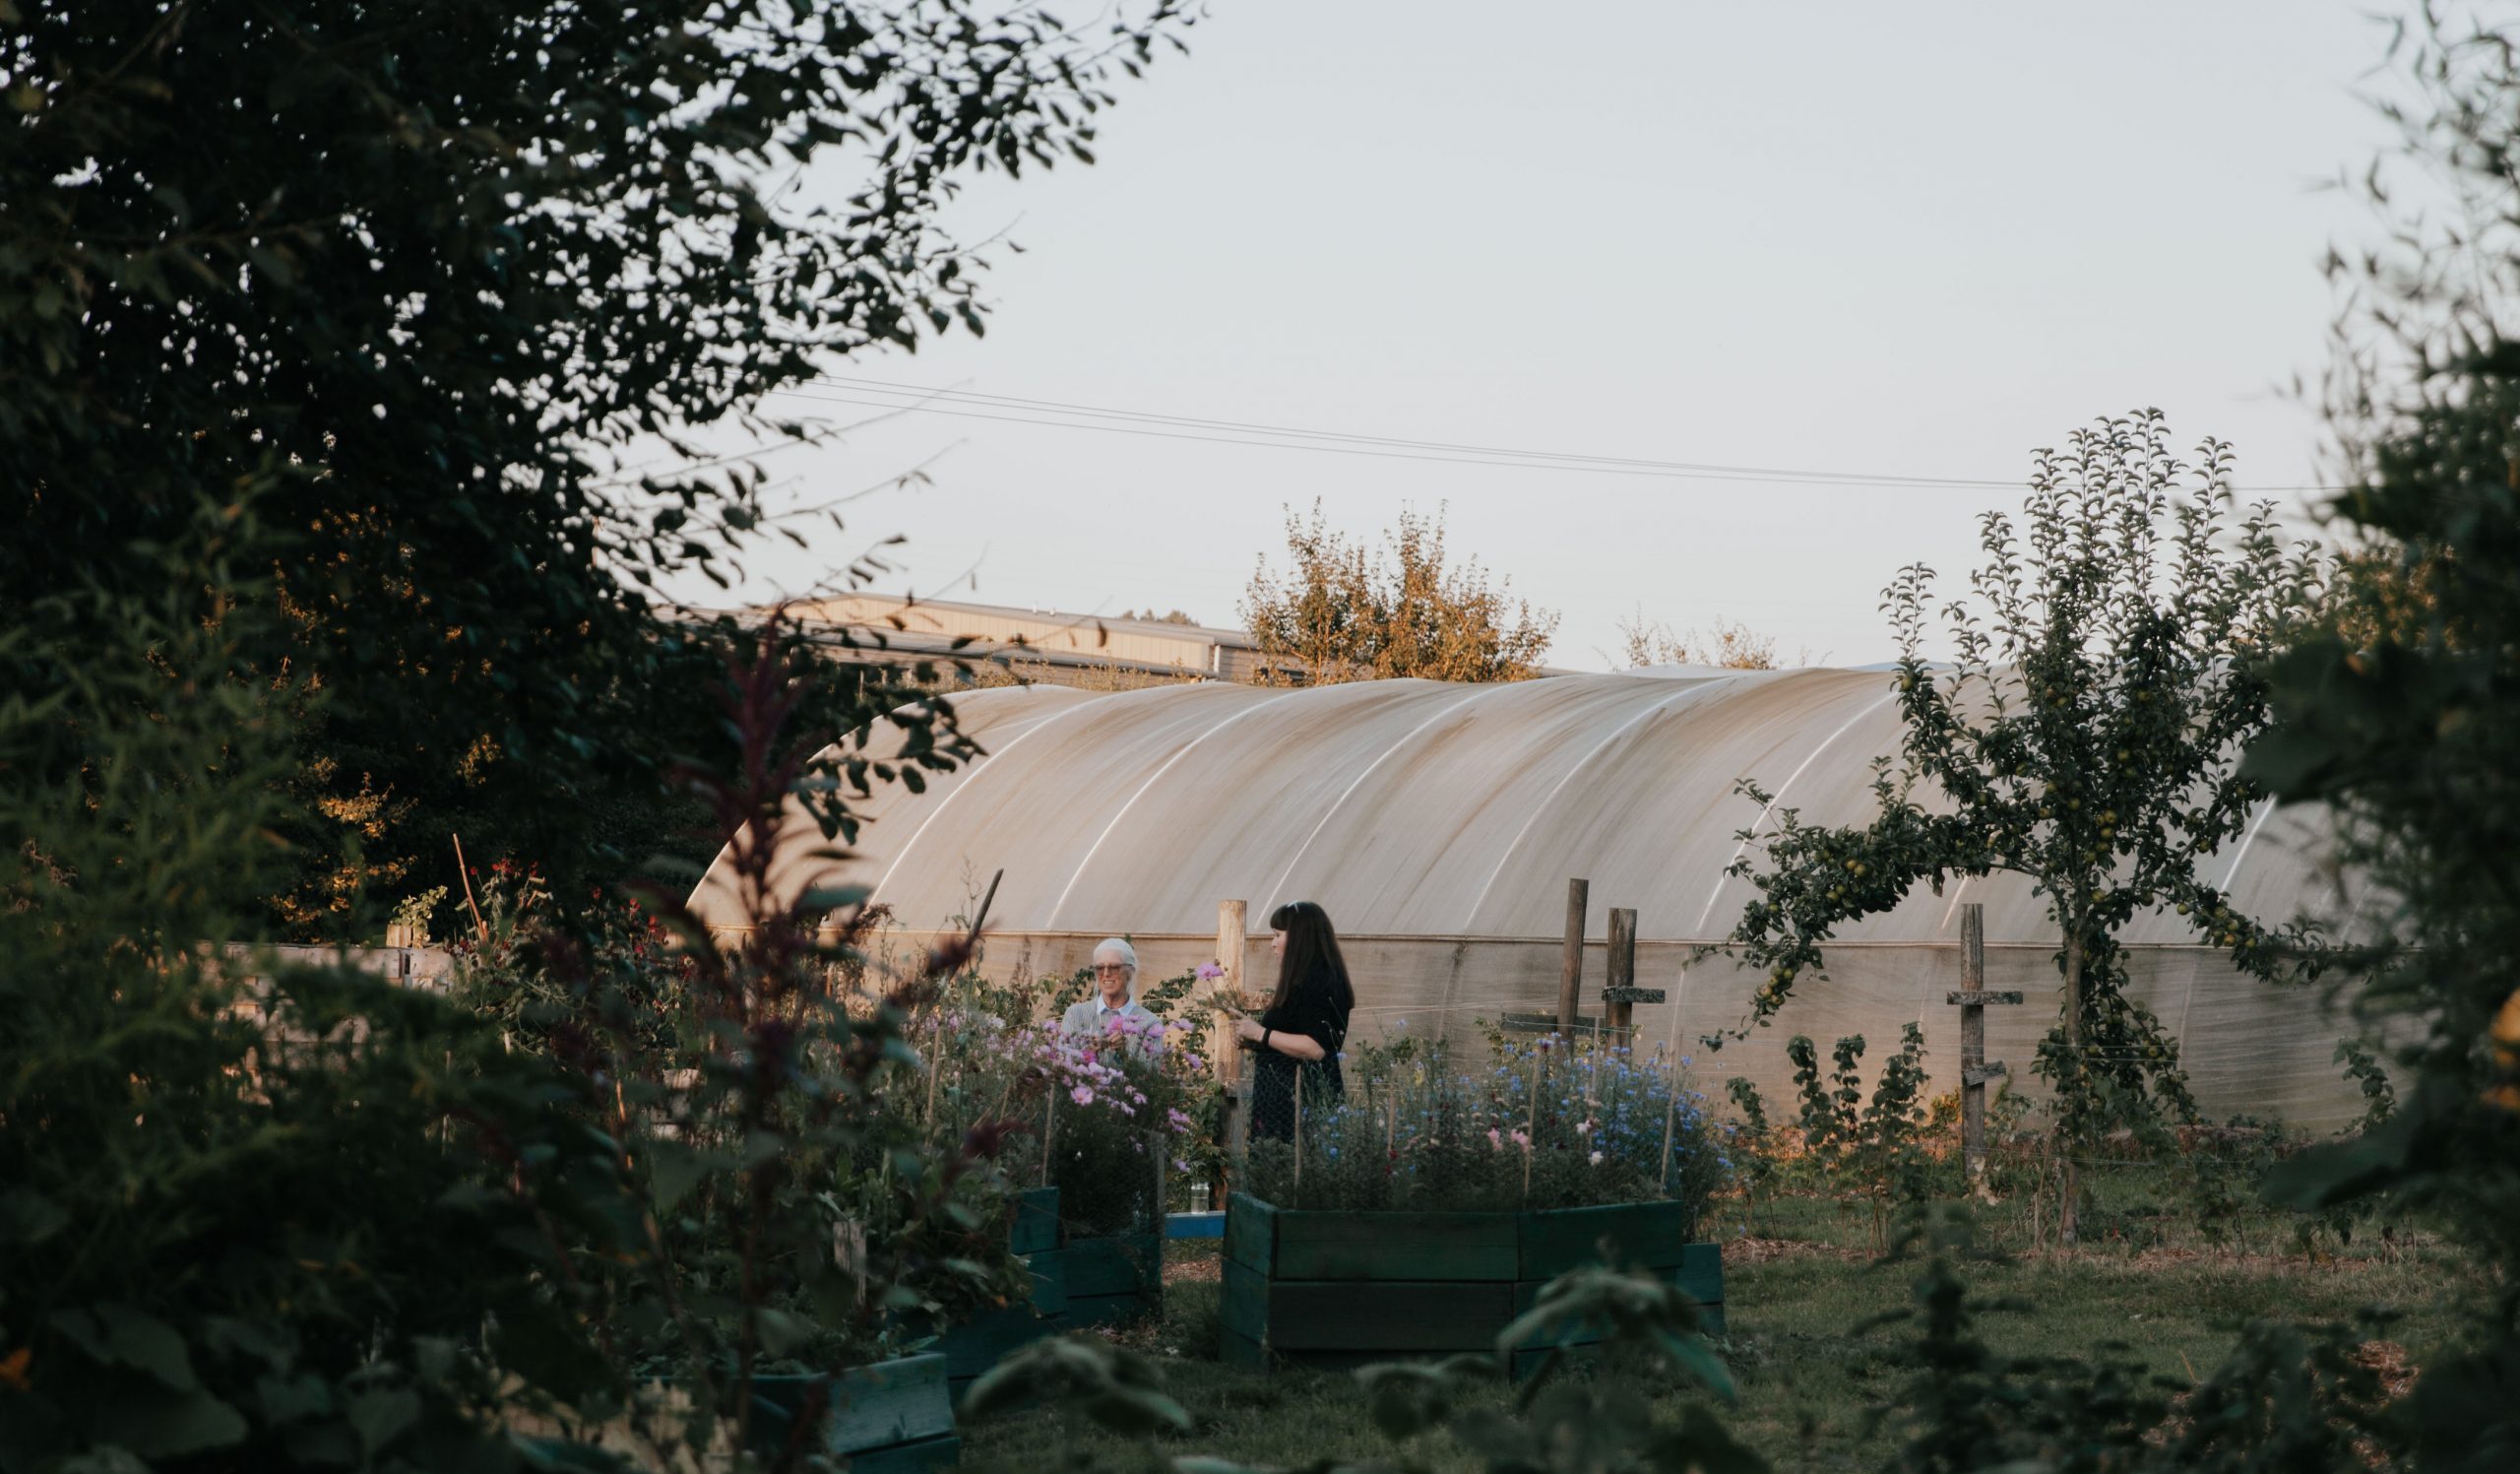 view of people and polytunnel